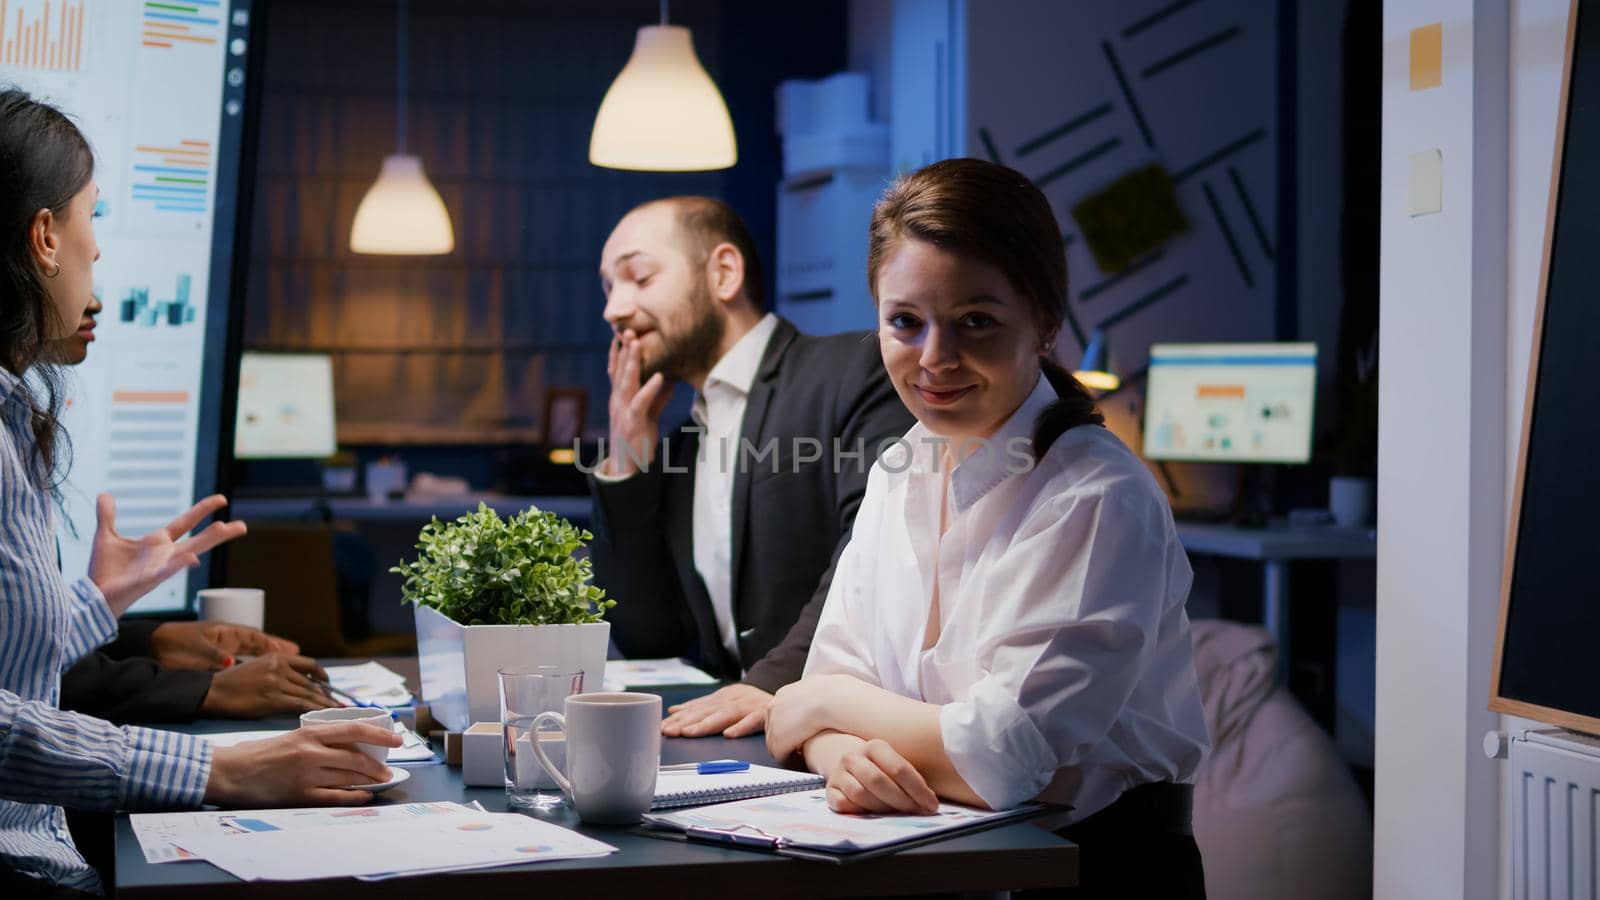 Portrait of workaholic businesswoman looking into camera while working in company office meeting room by DCStudio